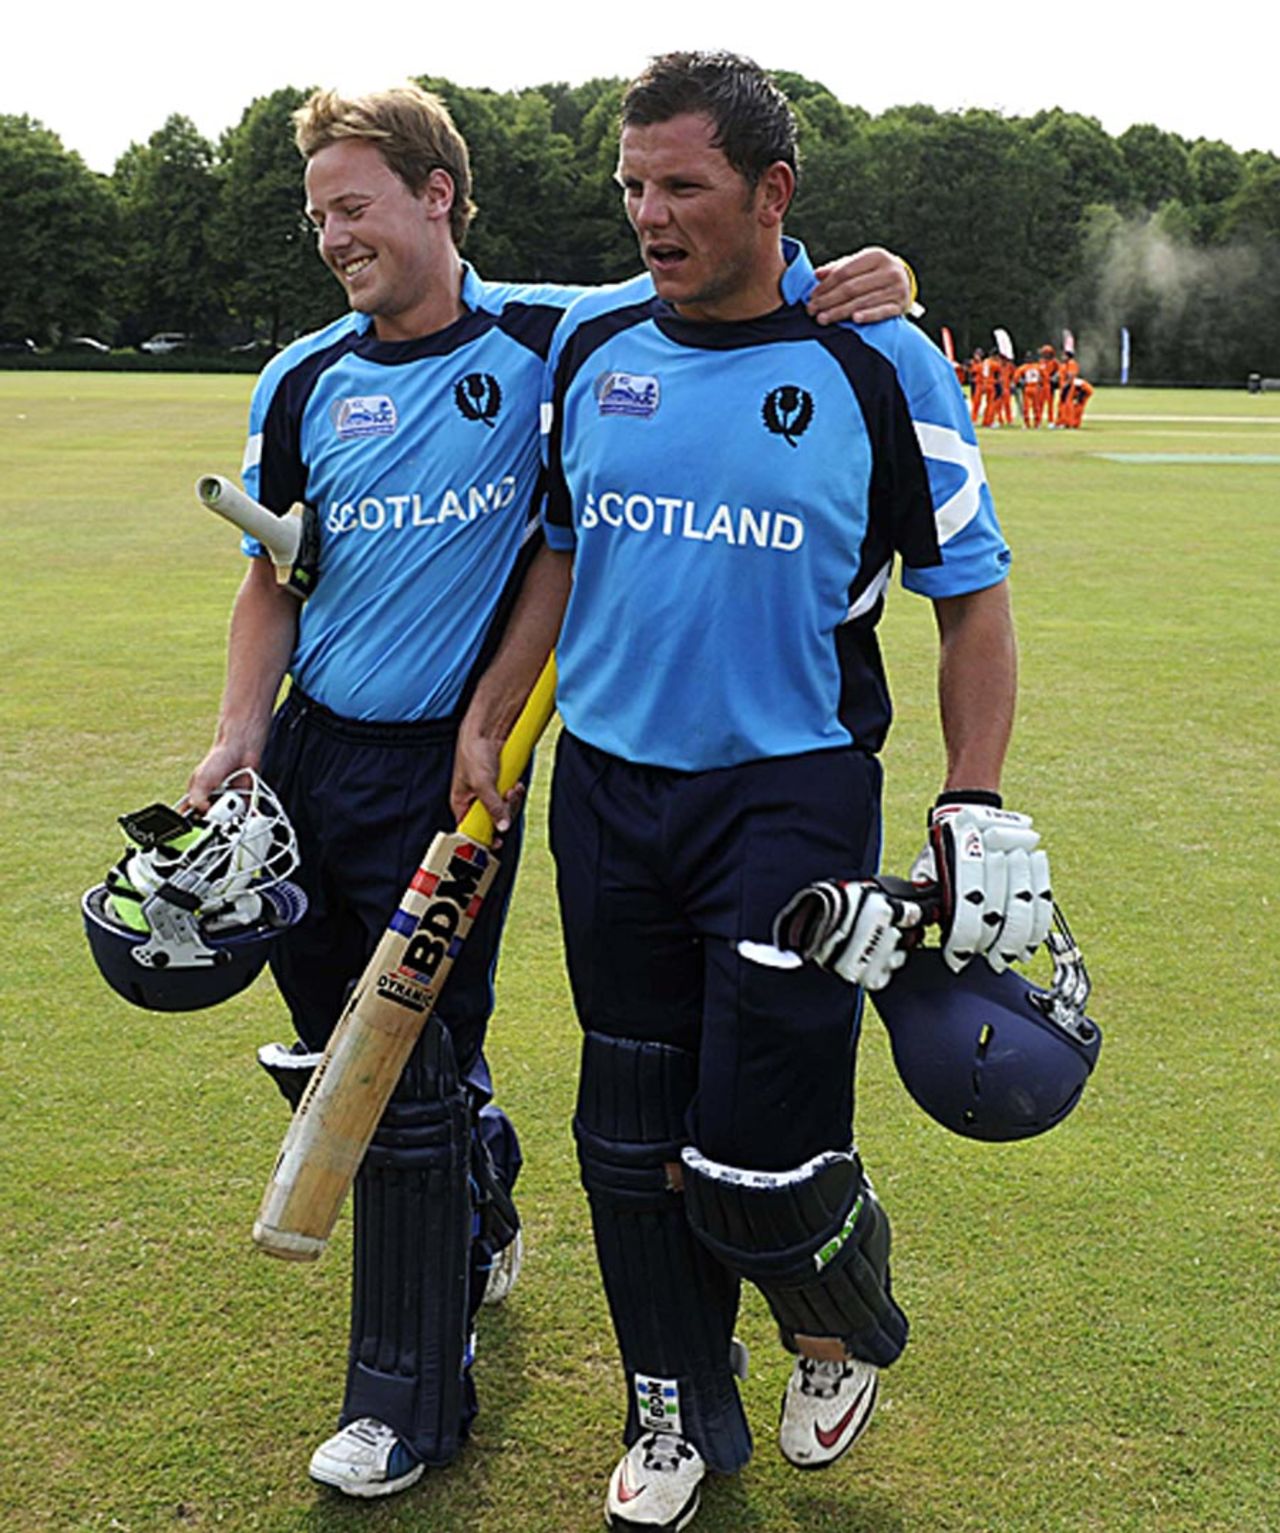 Ross Lyons and Gordon Drummond walk back after sealing a thrilling win, Netherlands v Scotland, ICC World Cricket League Division One, Amstelveen, July 1, 2010